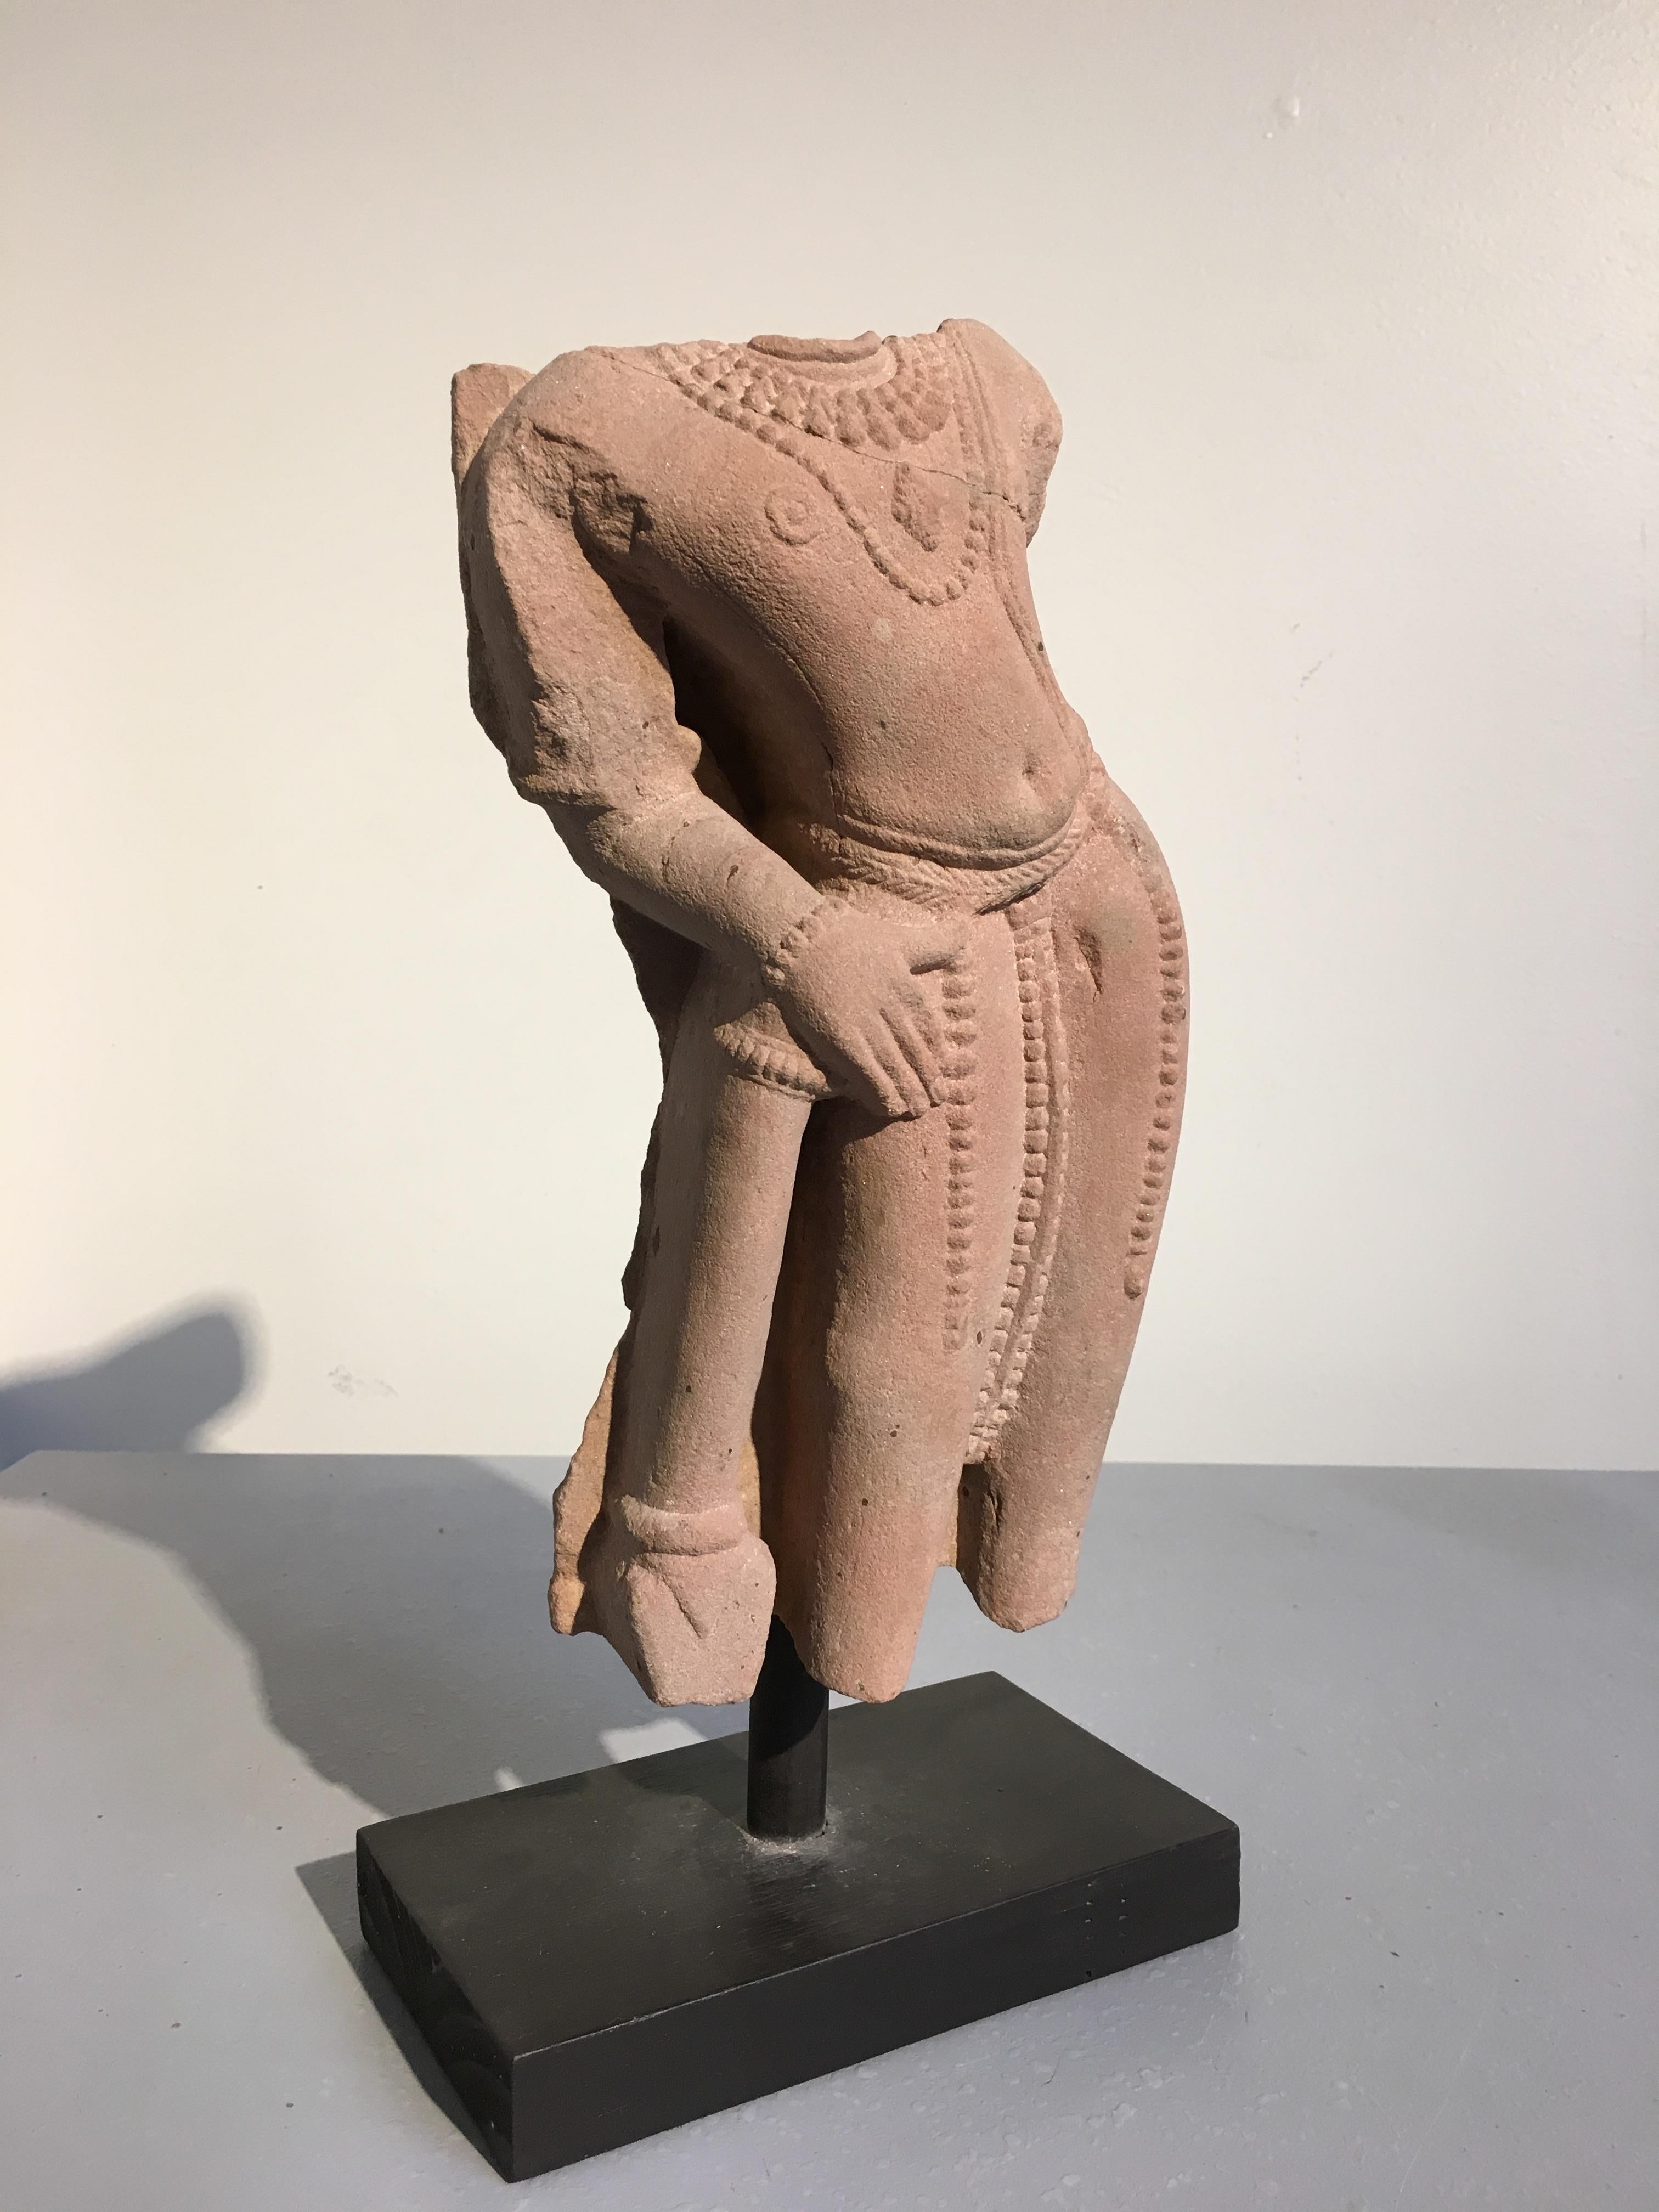 An alluring fragmentary sculpture of the Hindu god Vishnu, carved from pink sandstone, Madhya Pradesh, circa 10th-11th century.

Carved from a pink sandstone, Vishnu the Preserver is portrayed in an exaggerated tribhanga (thrice bent) pose. His